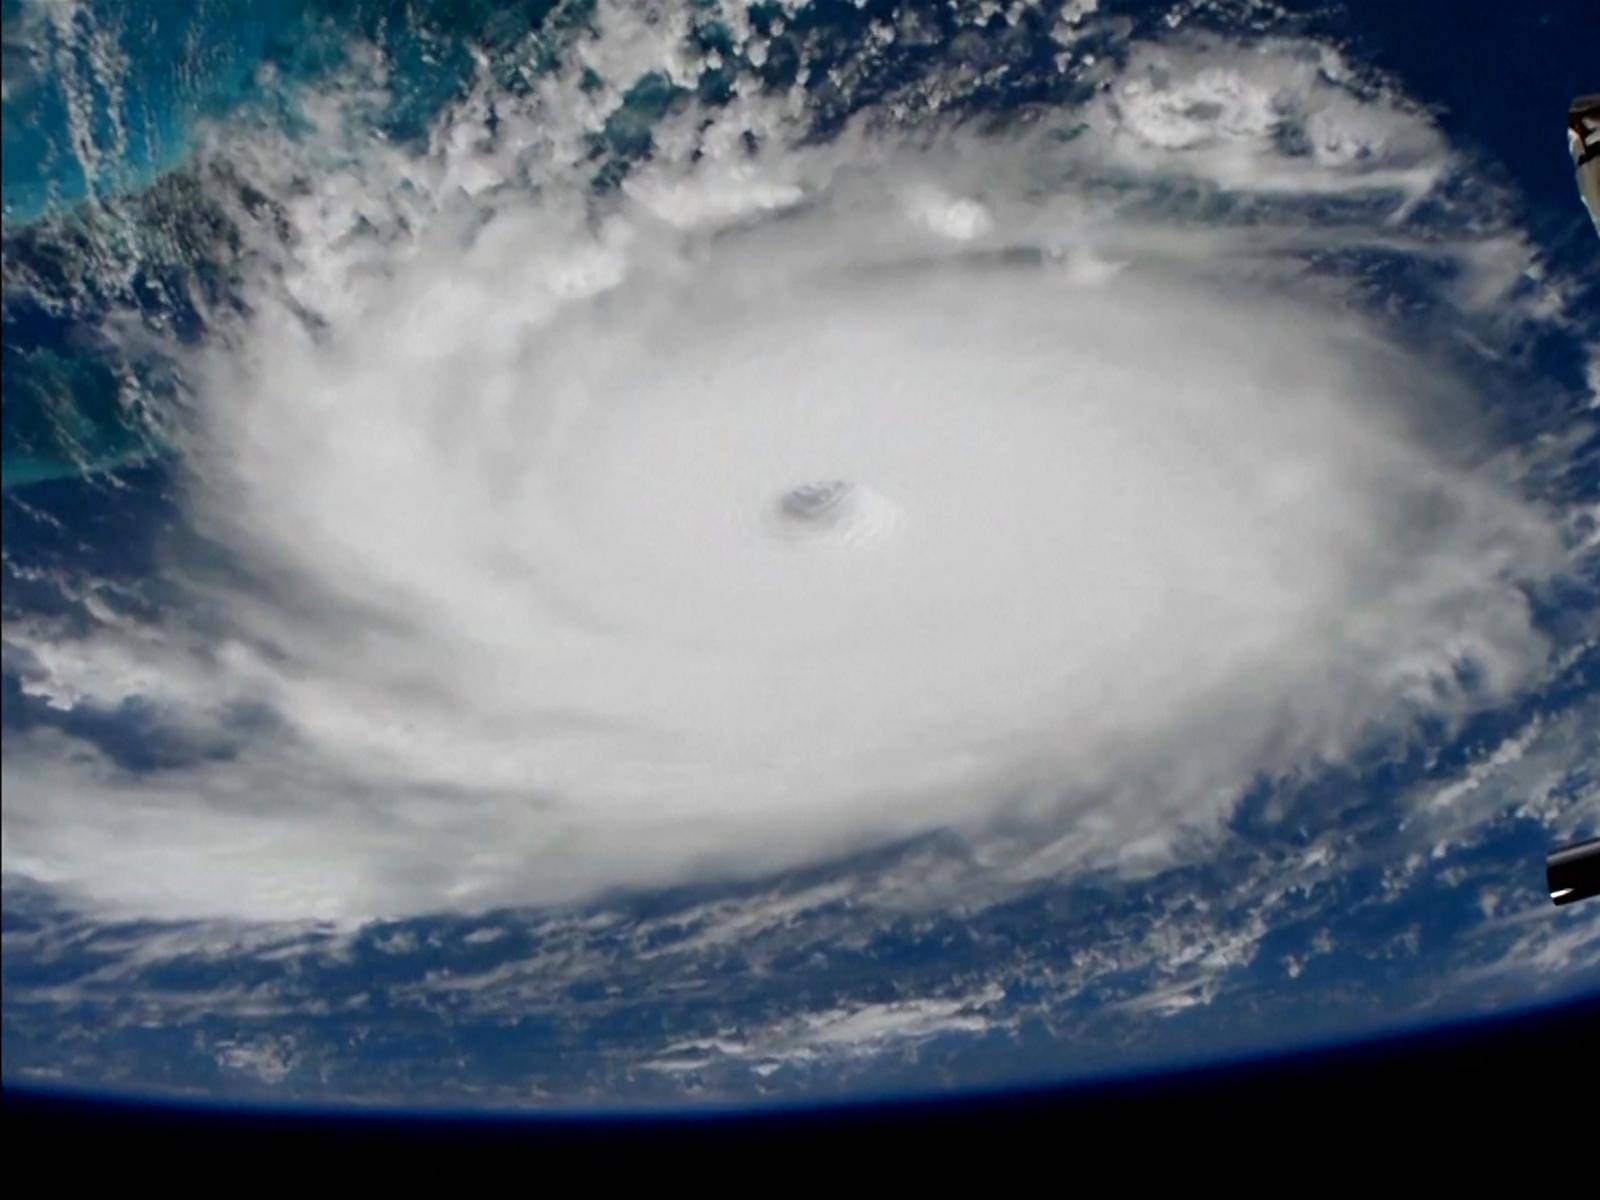 Hurricane Dorian is viewed from the International Space Station